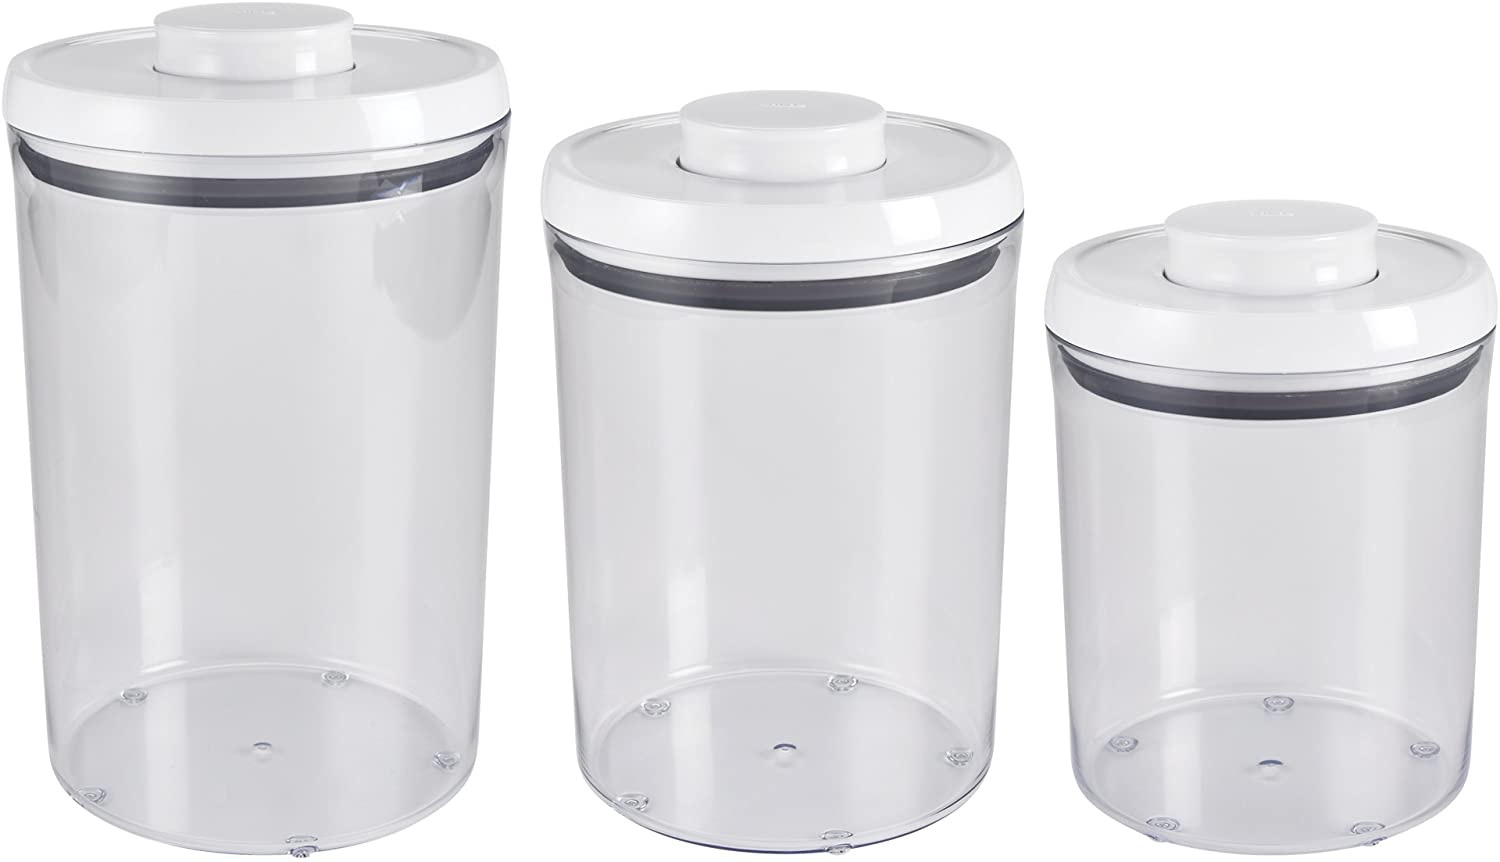 OXO Good Grips Round Flour & Sugar Canisters, 3-Piece